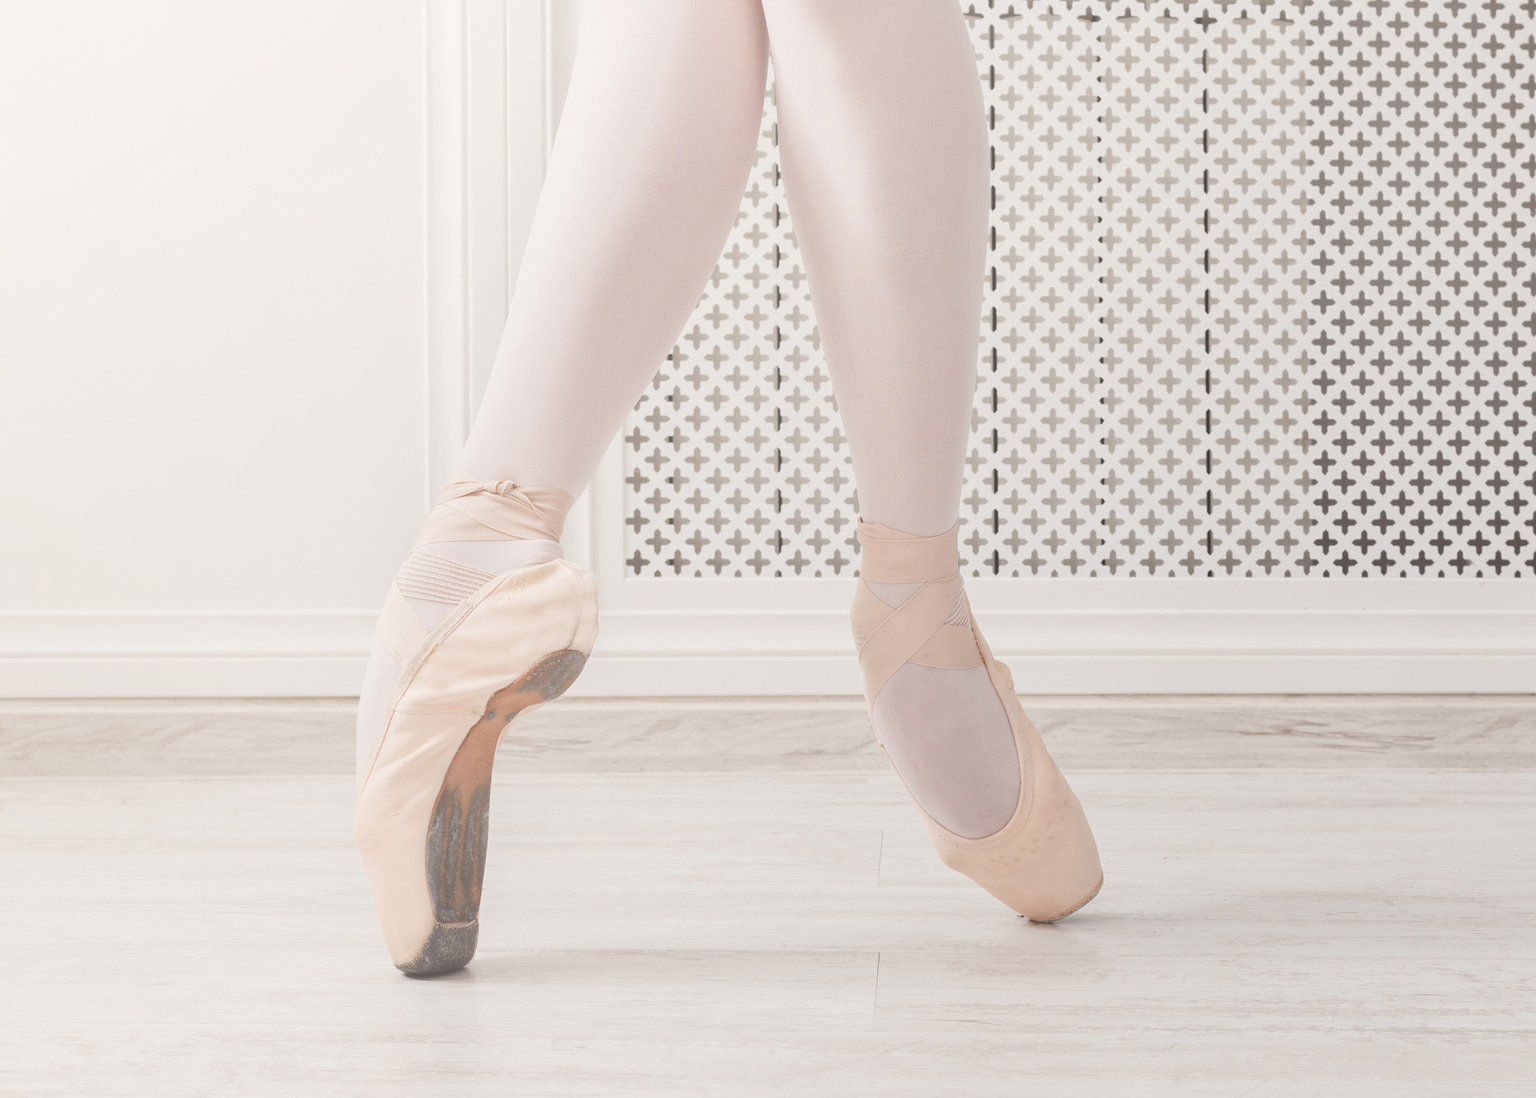 A ballerina is shown from the knees down on pointe, wearing pink tights, on a white wooden floor..